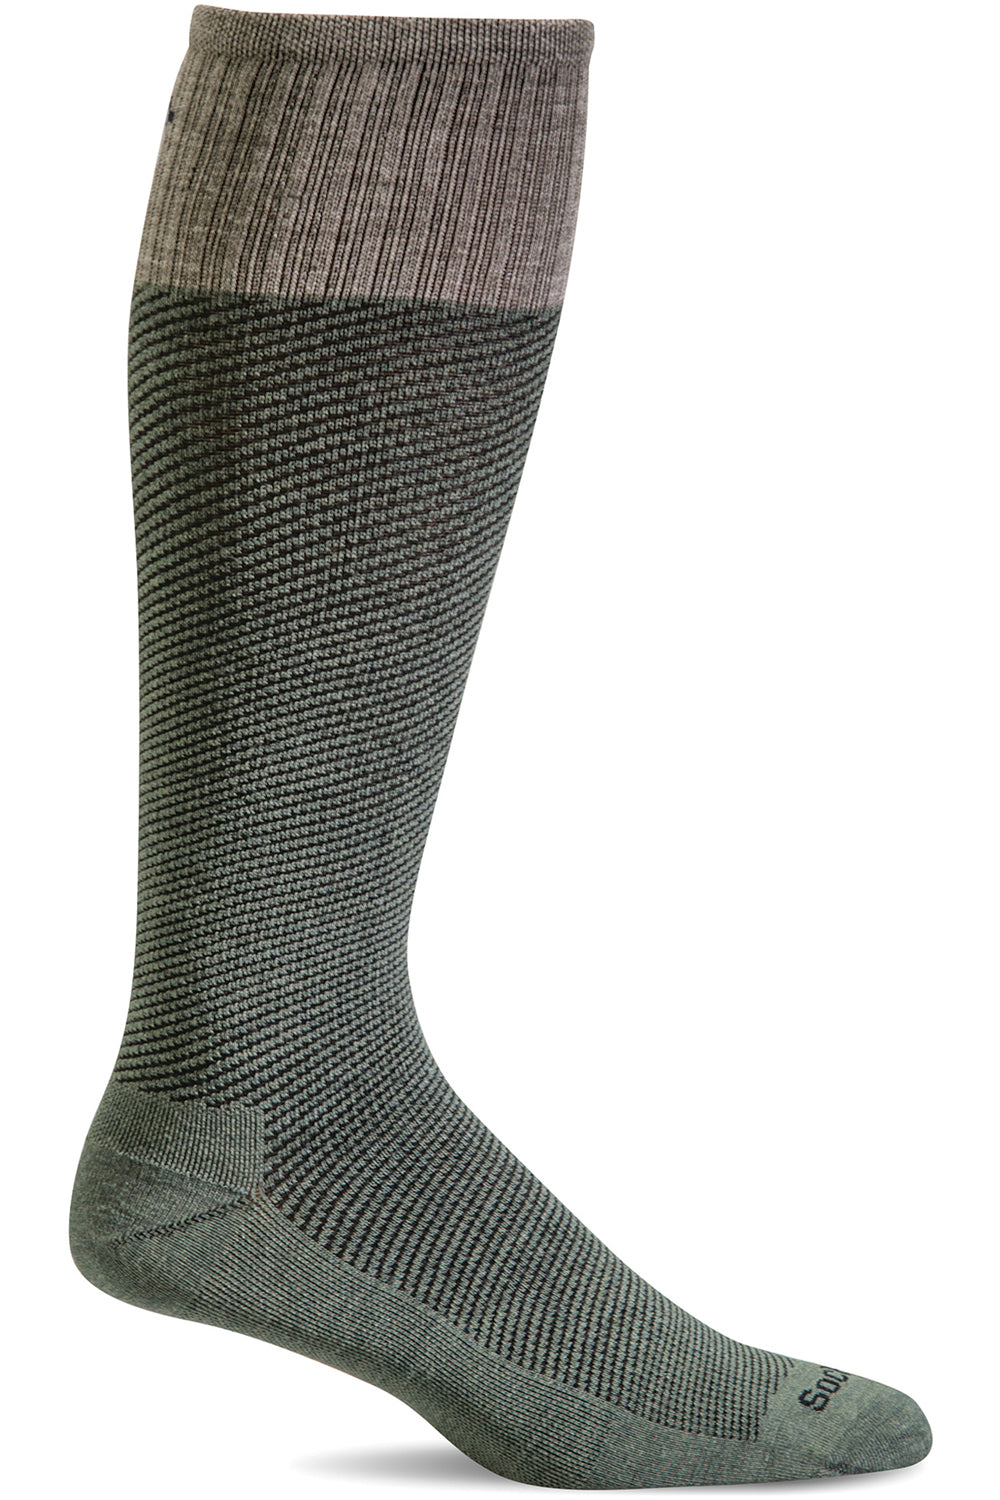 Sockwell Men's Bart Compression Sock in Eucalyptus color from the side